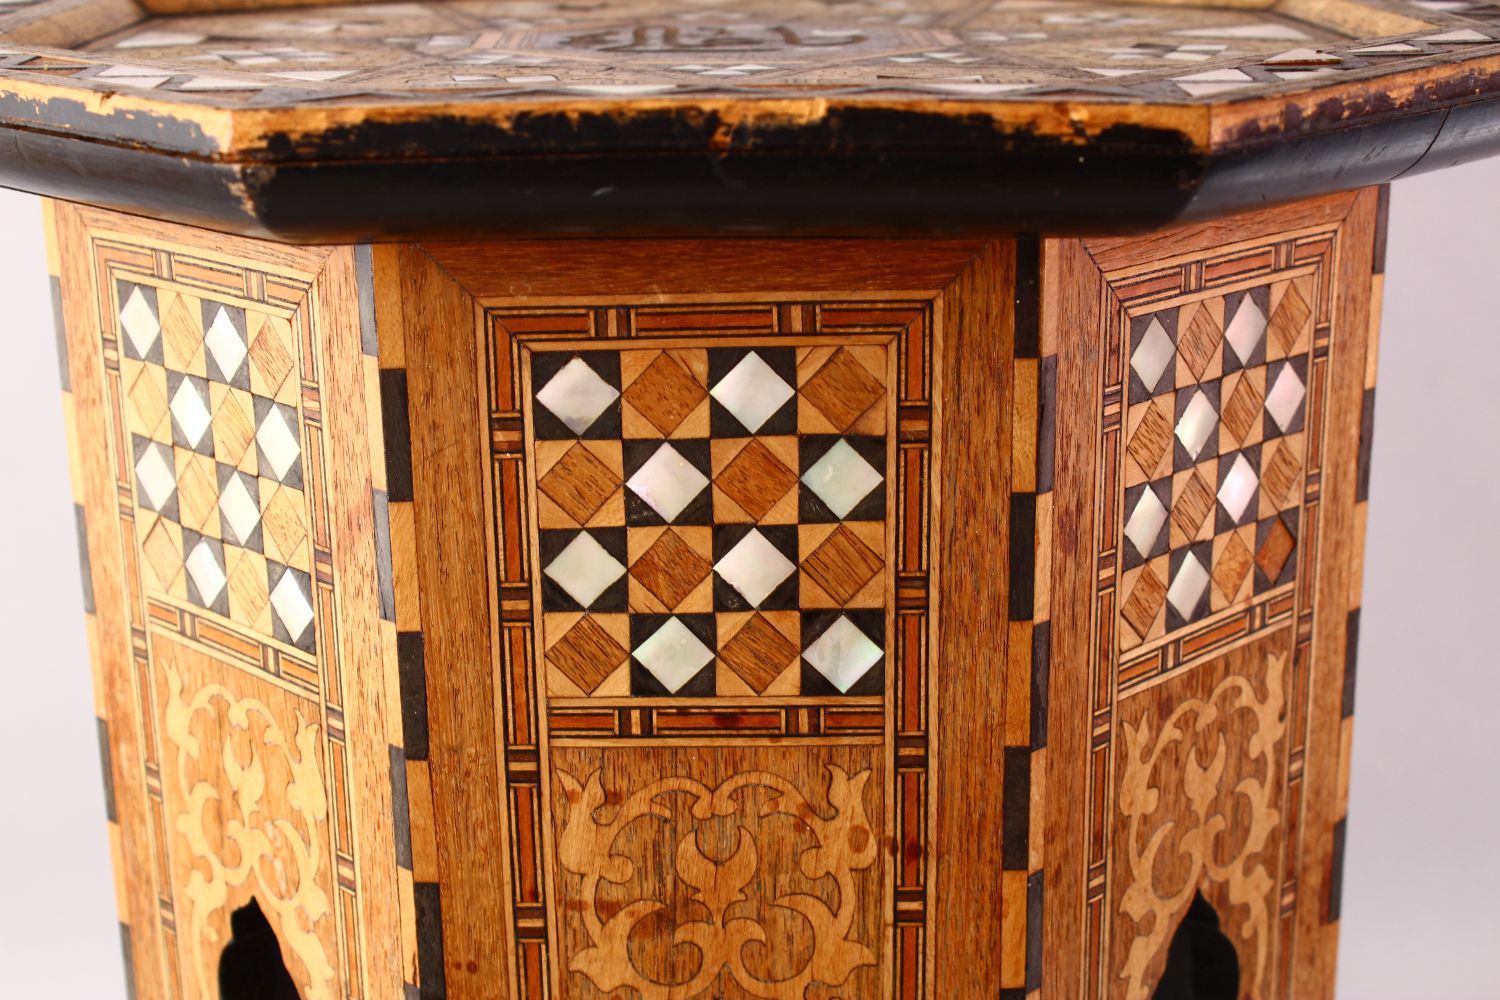 A FINE 19TH CENTURY TURKISH OTTOMAN MOTHER OF PEARL INLAID OCTAGONAL WOODEN TABLE, The top with - Image 6 of 6